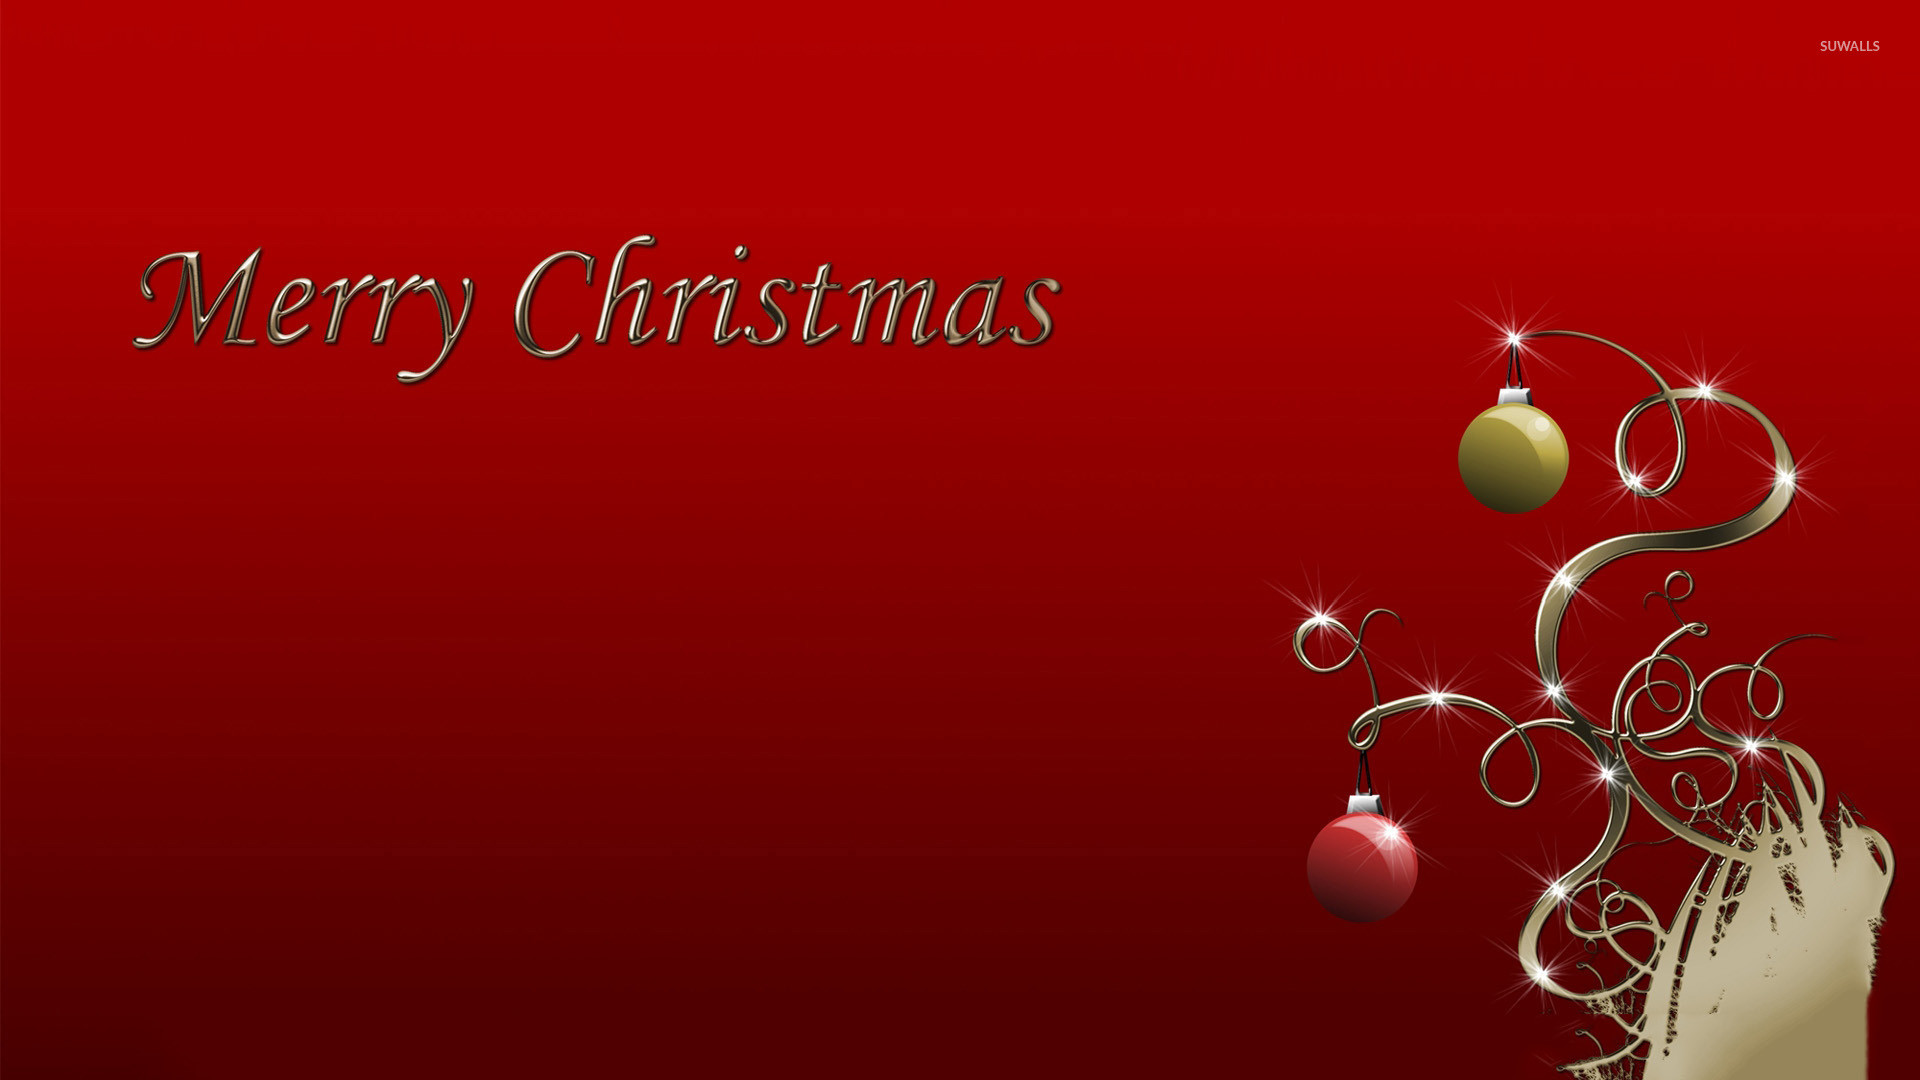 1920x1080 Red and green Christmas baubles wallpaper